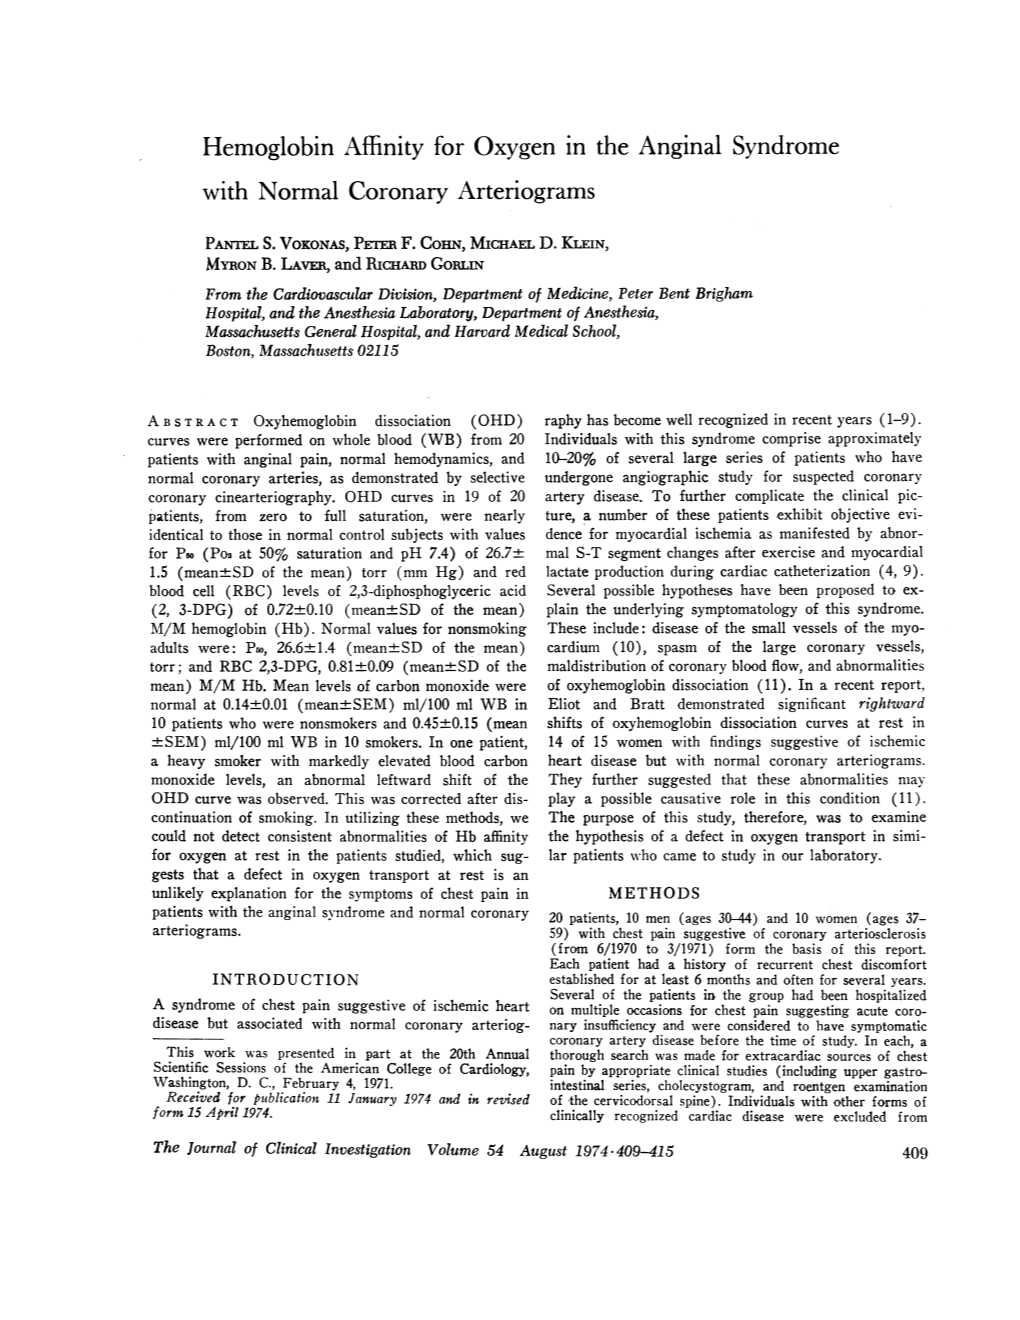 Hemoglobin Affinity for Oxygen in the Anginal Syndrome with Normal Coronary Arteriograms